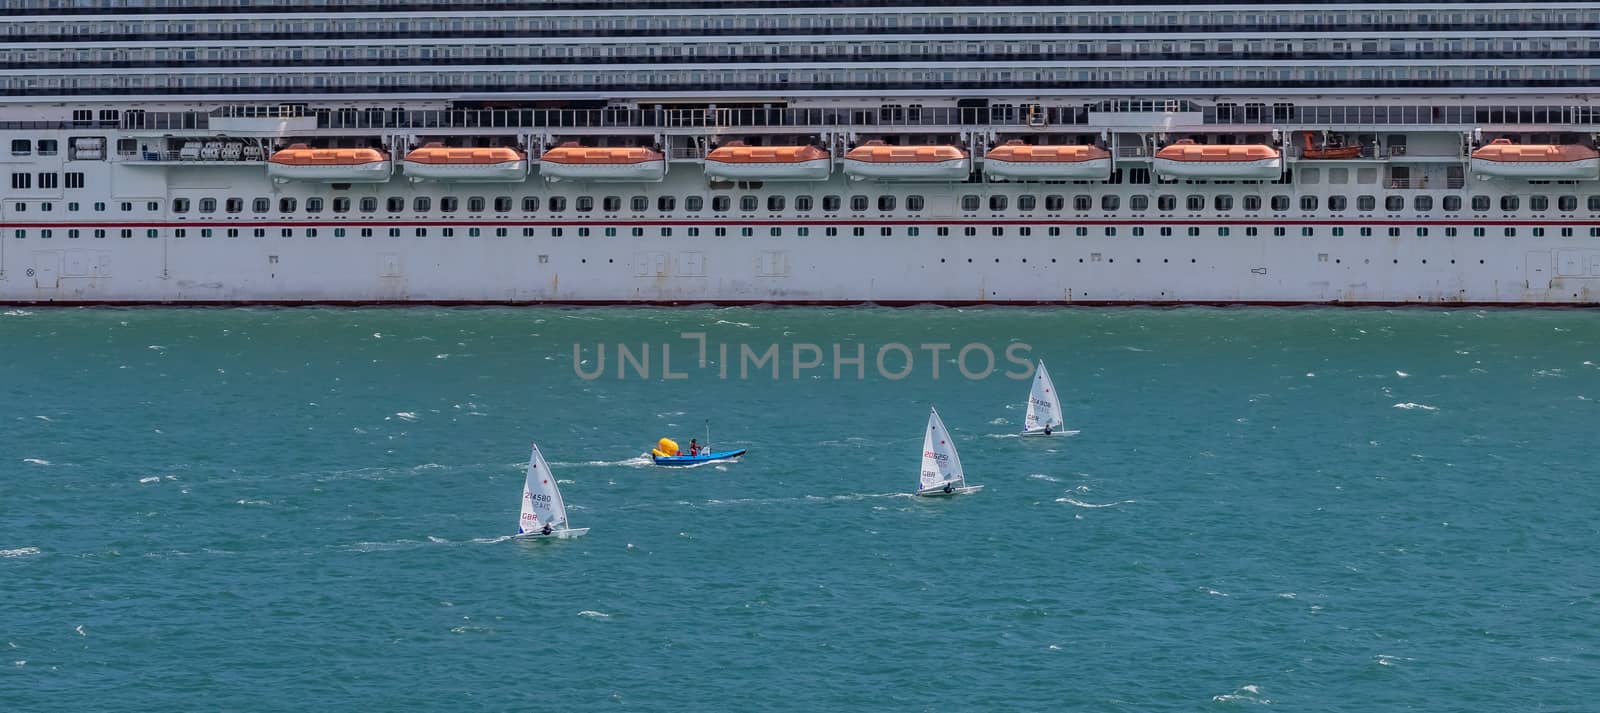 Shot of the laser class dinghies and a rescue boat by DamantisZ